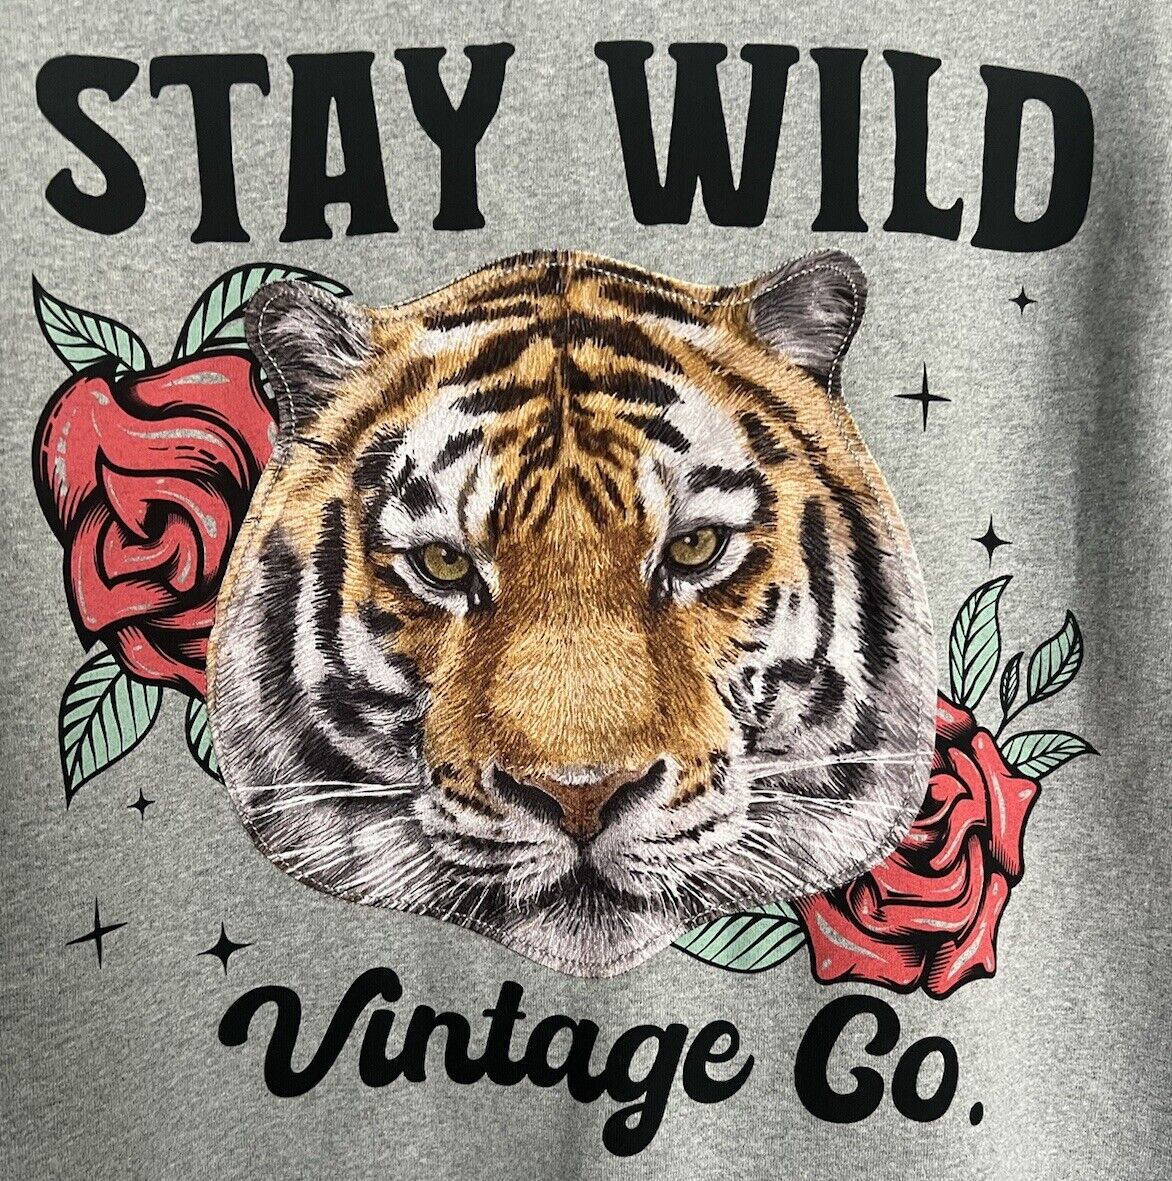 Stay Wild Vintage Co Recycle Threads Men’s Crewneck GRAY Size M - NWT Tiger/Rose